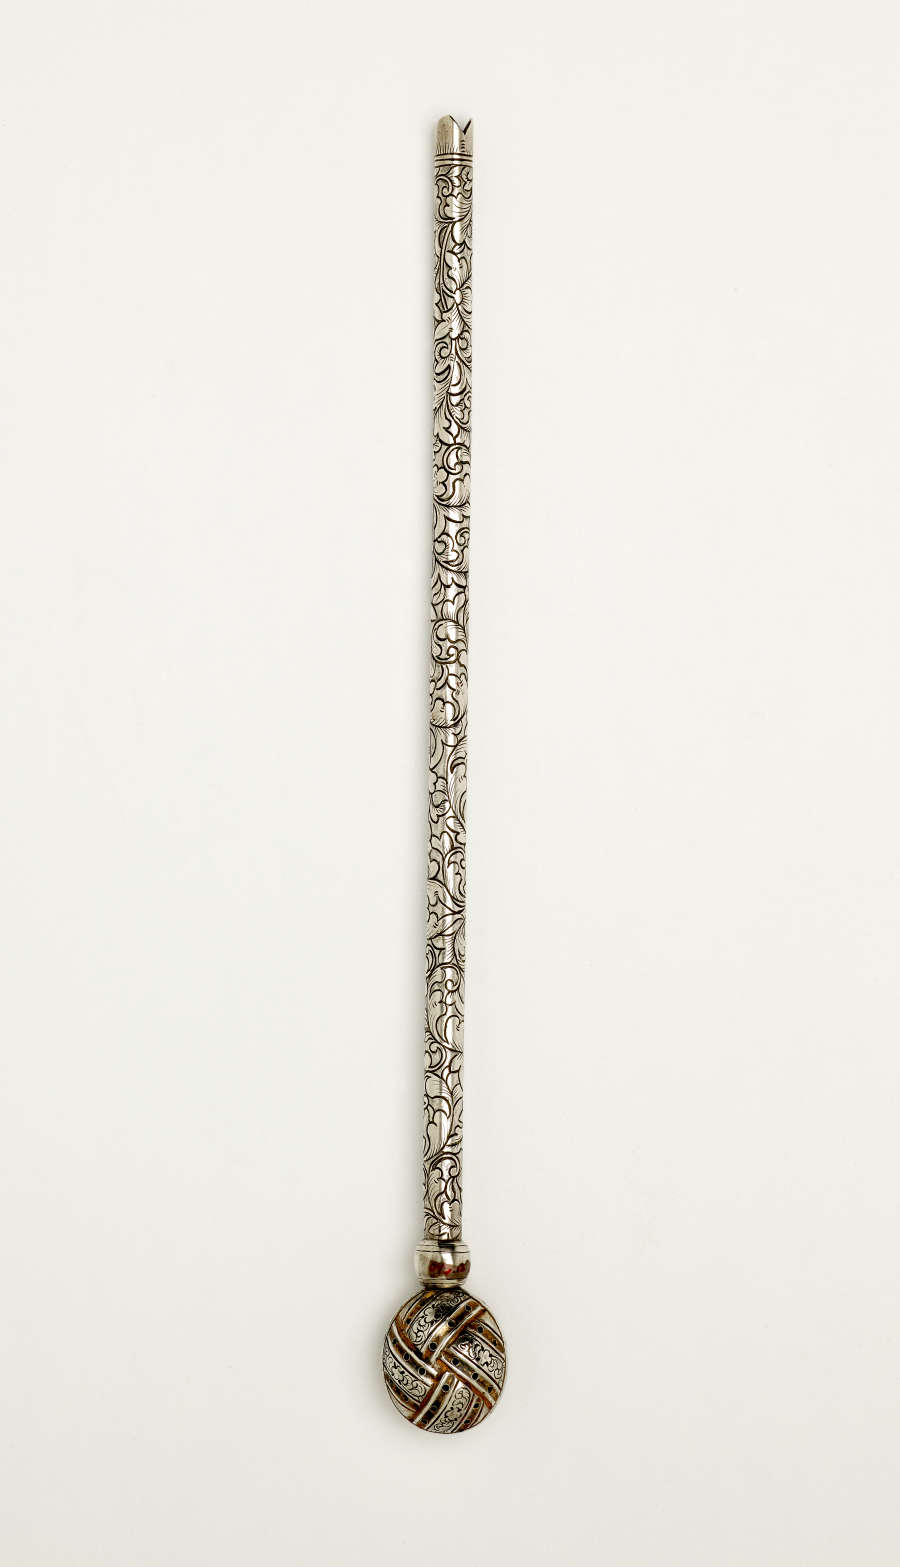  A long silver utensil with a decorative body and has one small bulbous end.